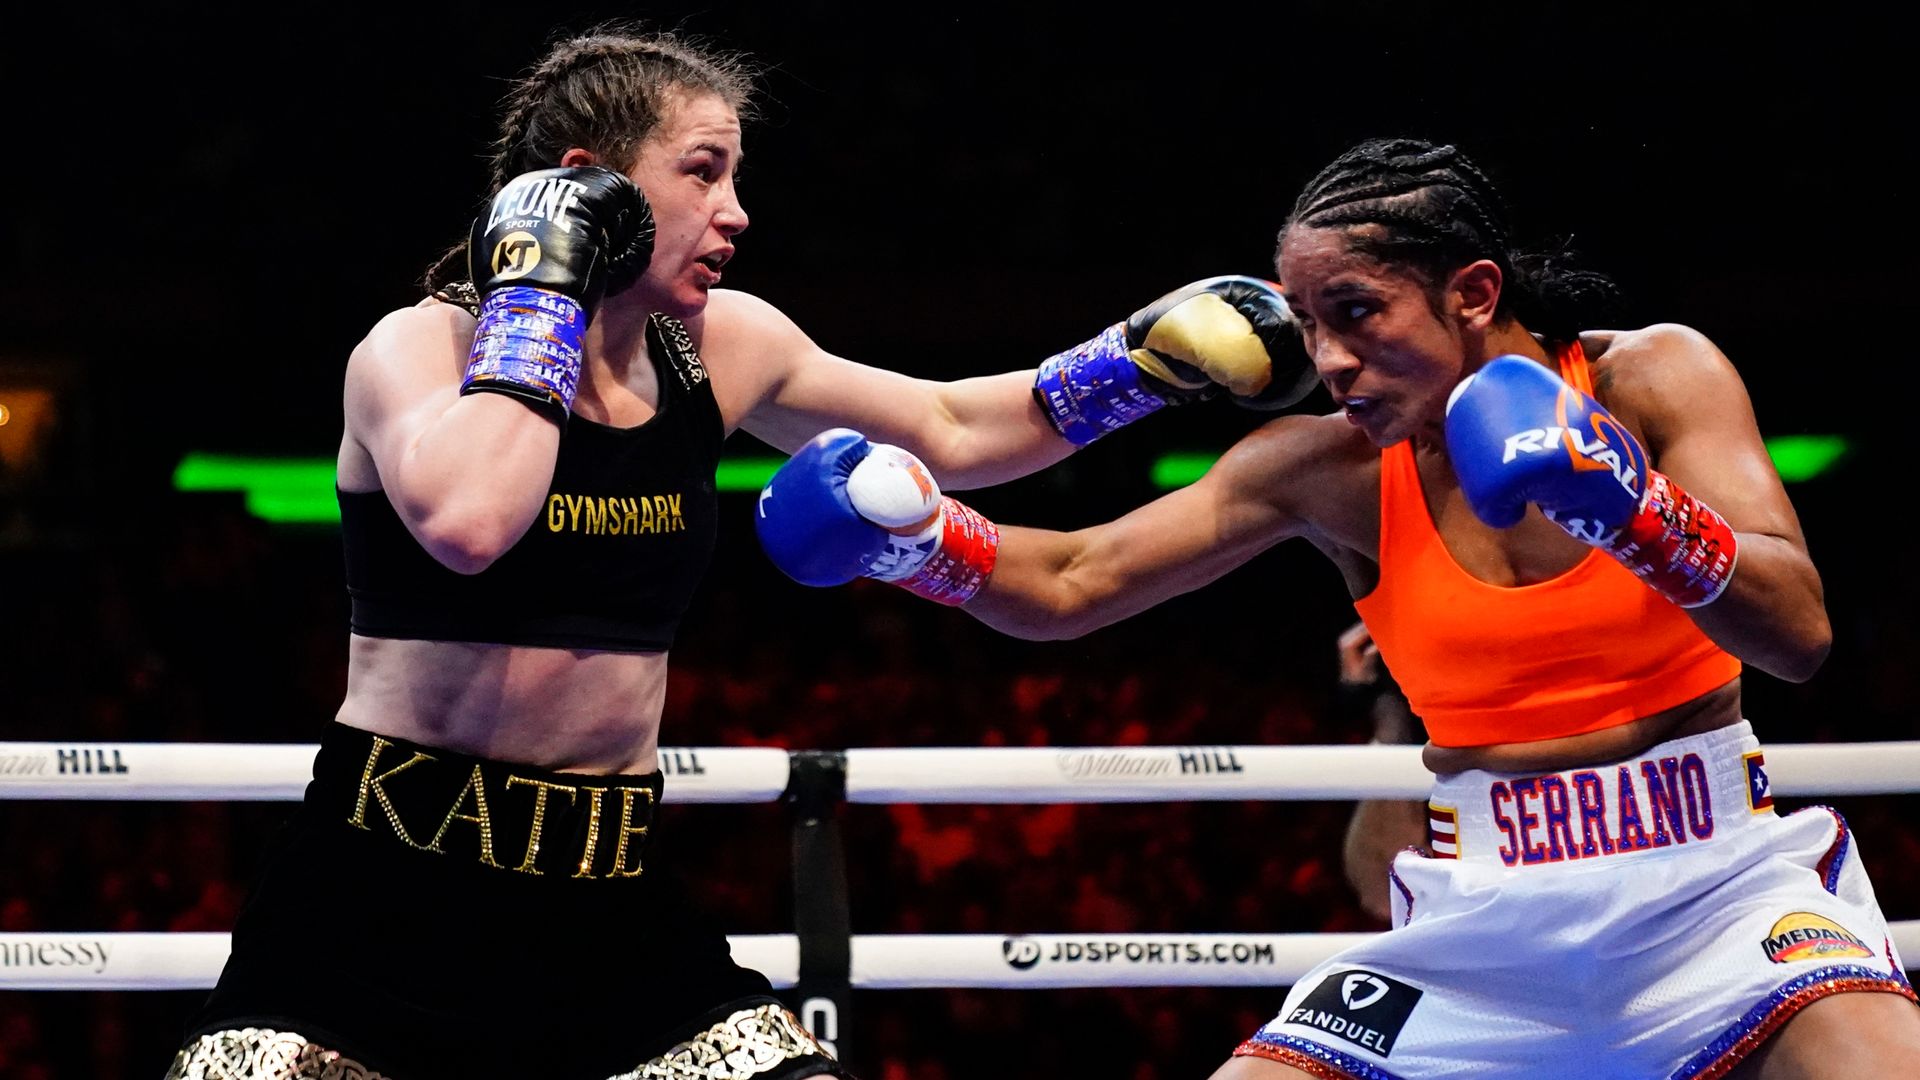 Taylor-Serrano rematch set for May 20 in Dublin